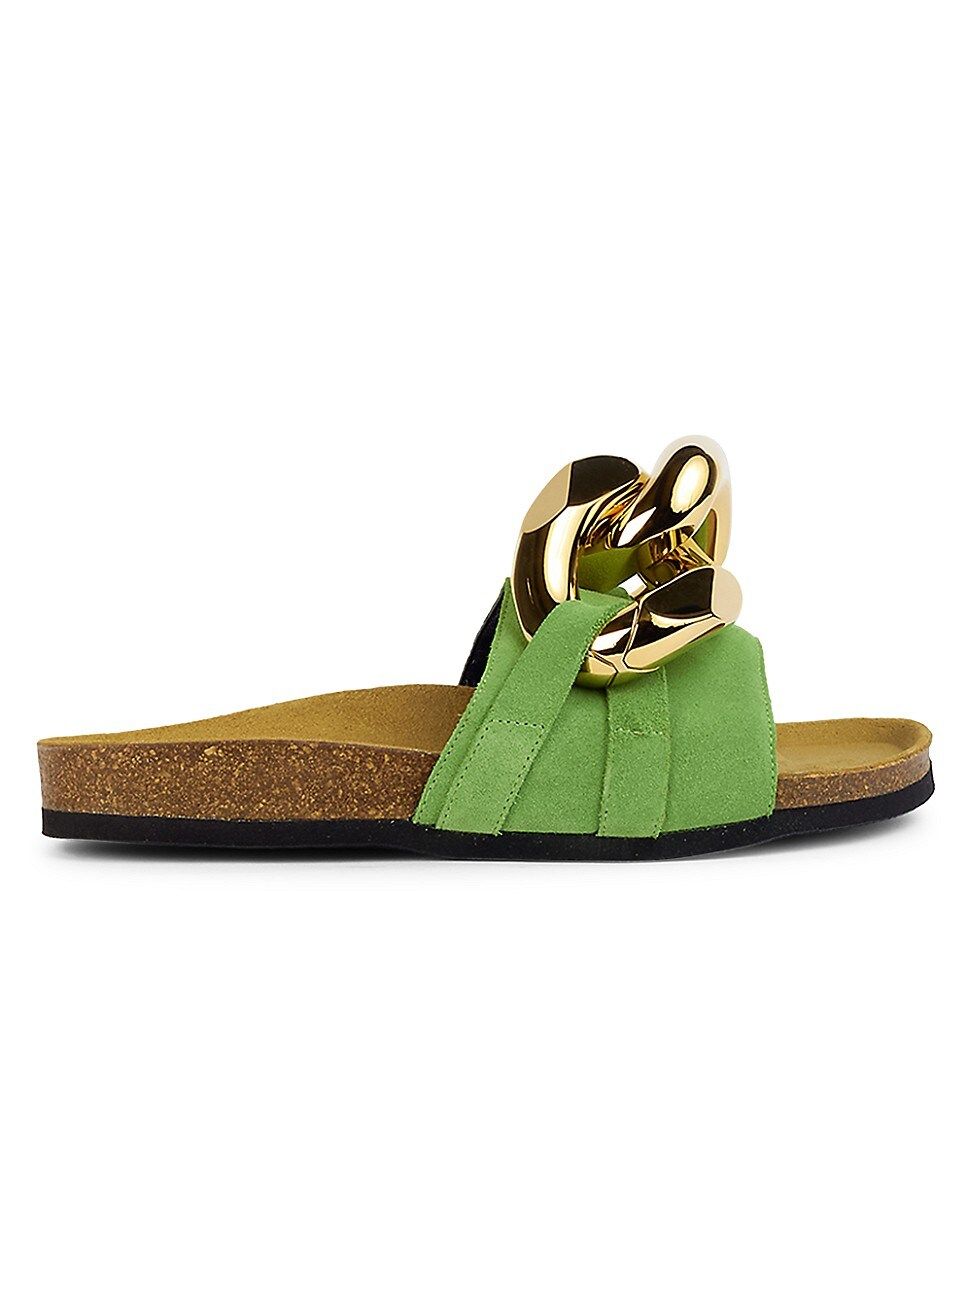 JW Anderson Chain Suede Slides | Saks Fifth Avenue